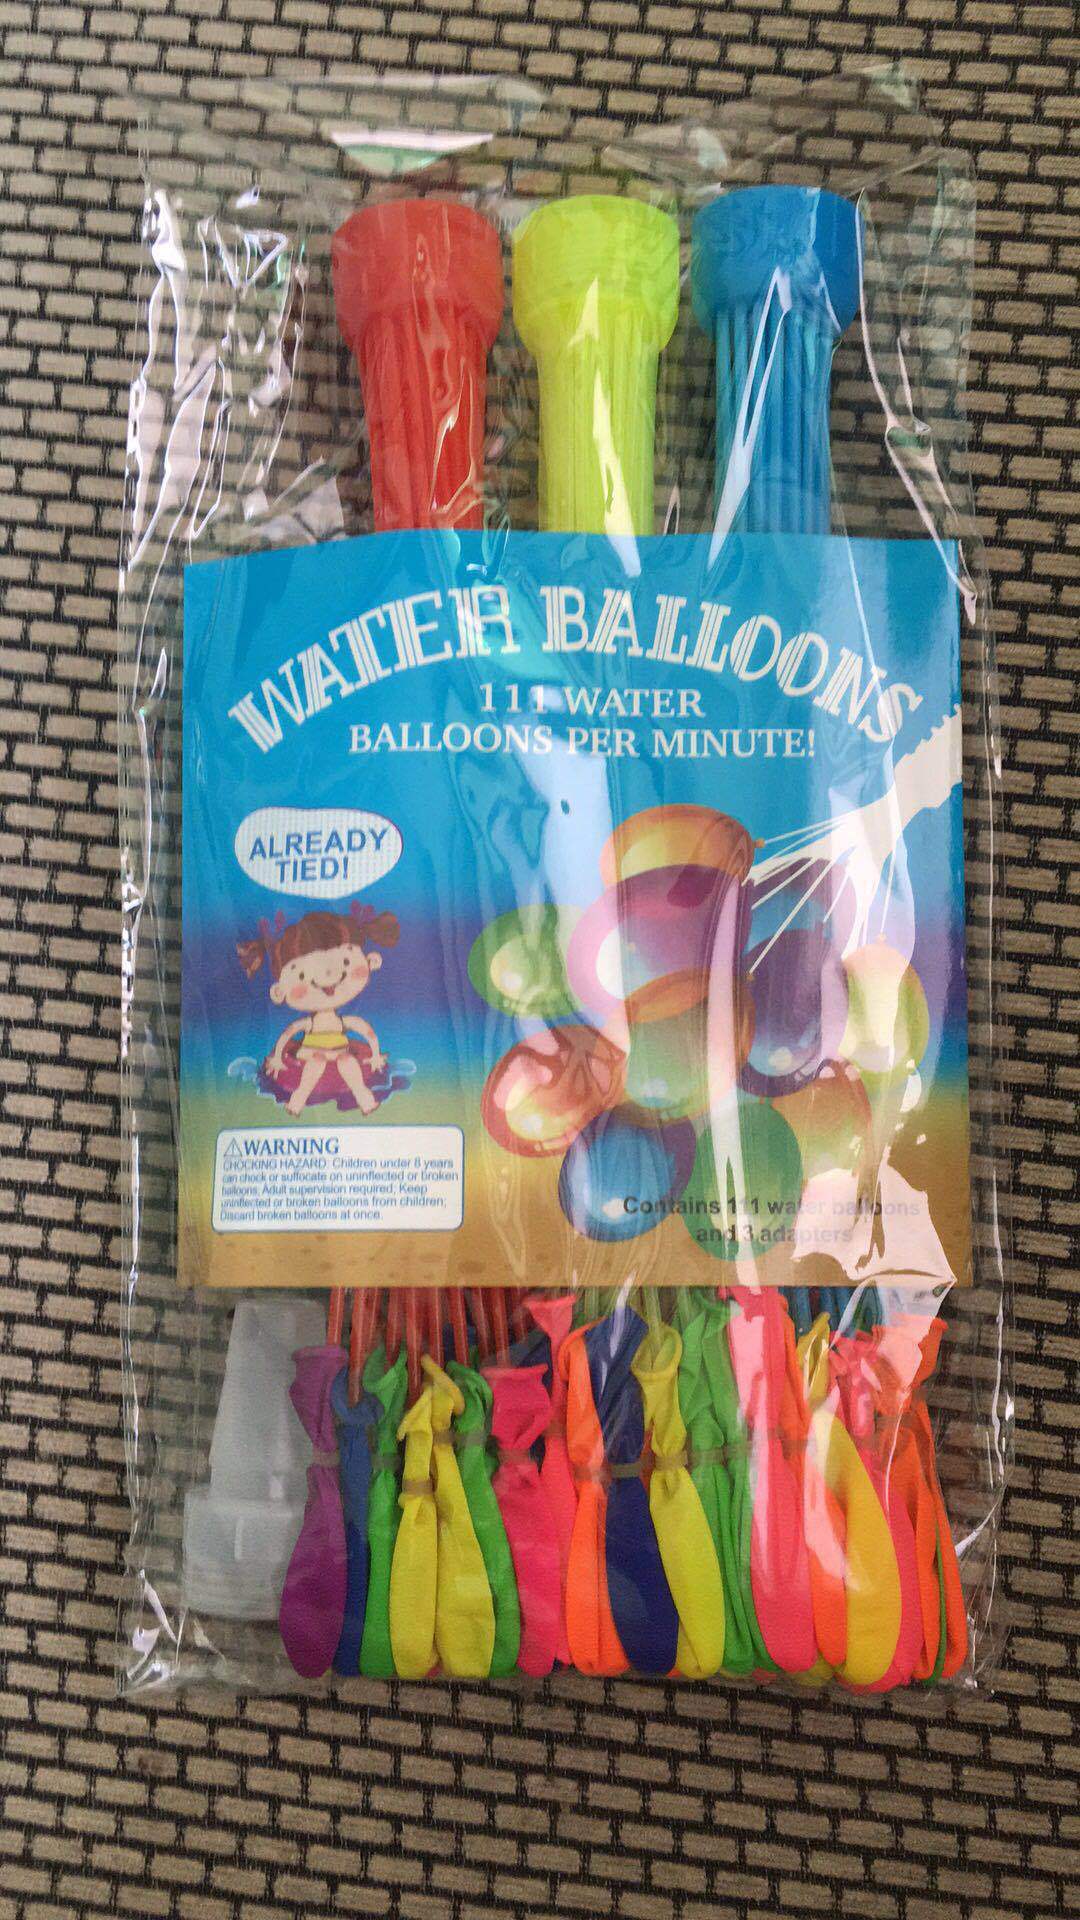 Cross-Border Water Ball Water Fight Fast Water Balloon Water Balloon Water Splashing Festival Carnival Water Balloon Water Ball Toy